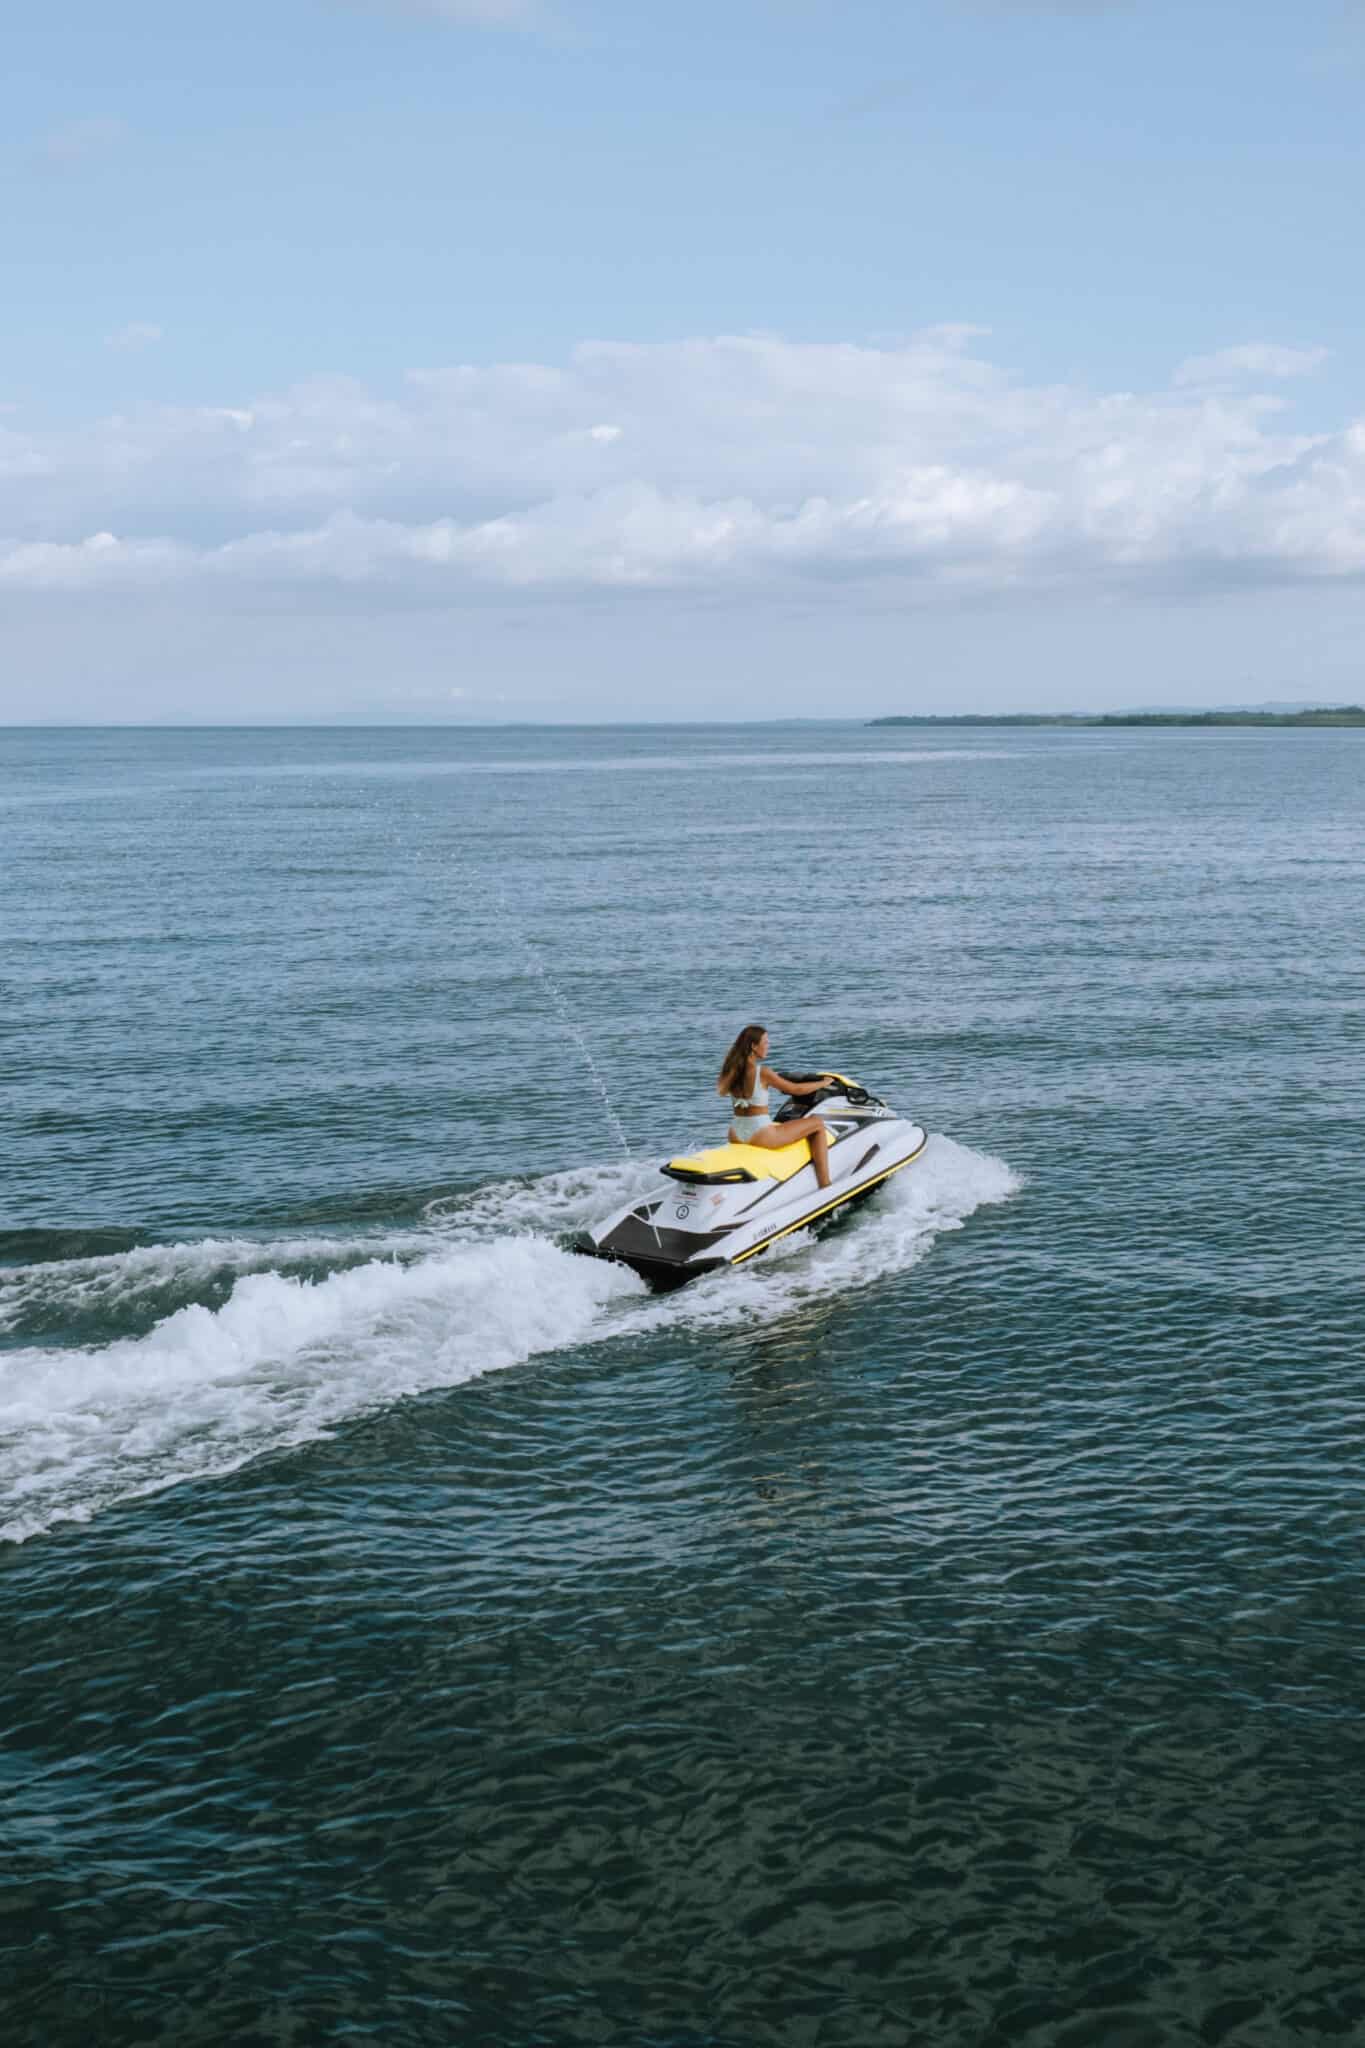 A person who loves the ocean and jet skiing is wanted to work with us.